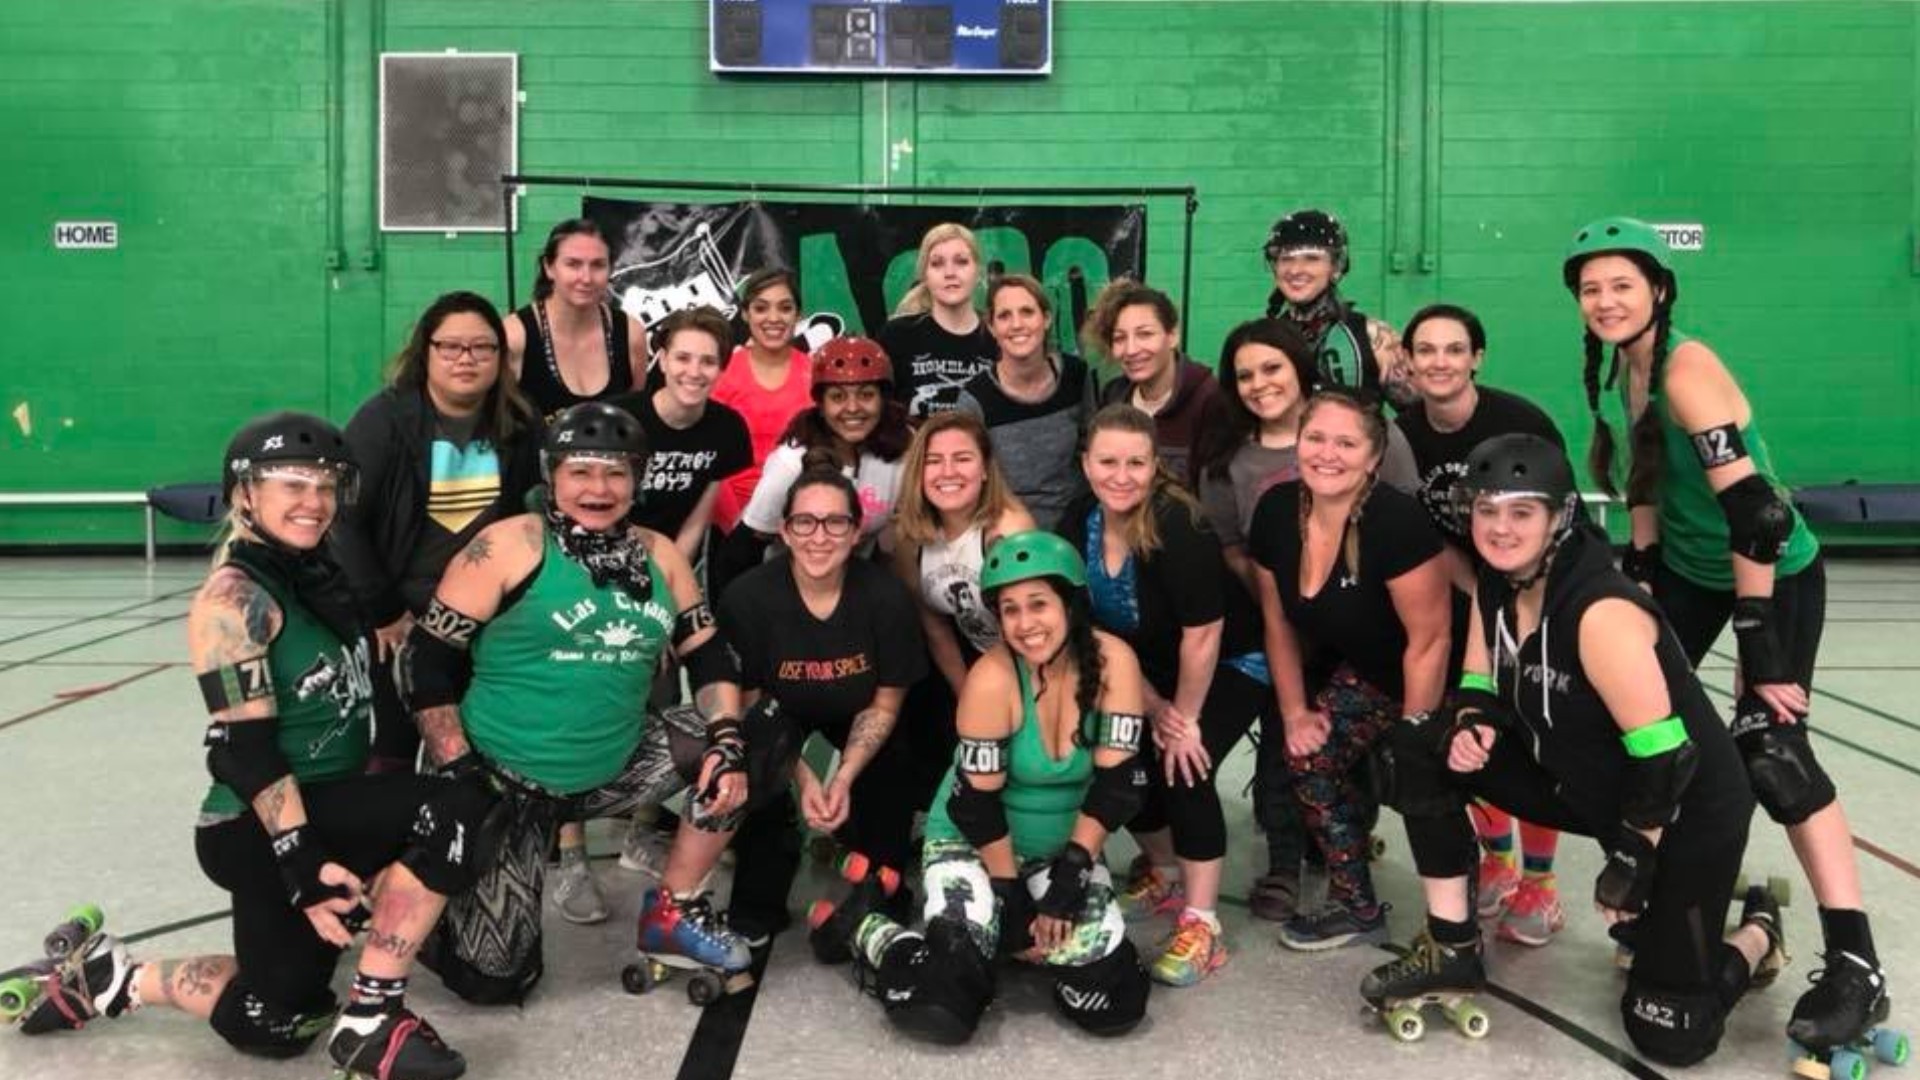 The Alamo City's very own Women's Flat Track roller derby team is looking for new recruits.